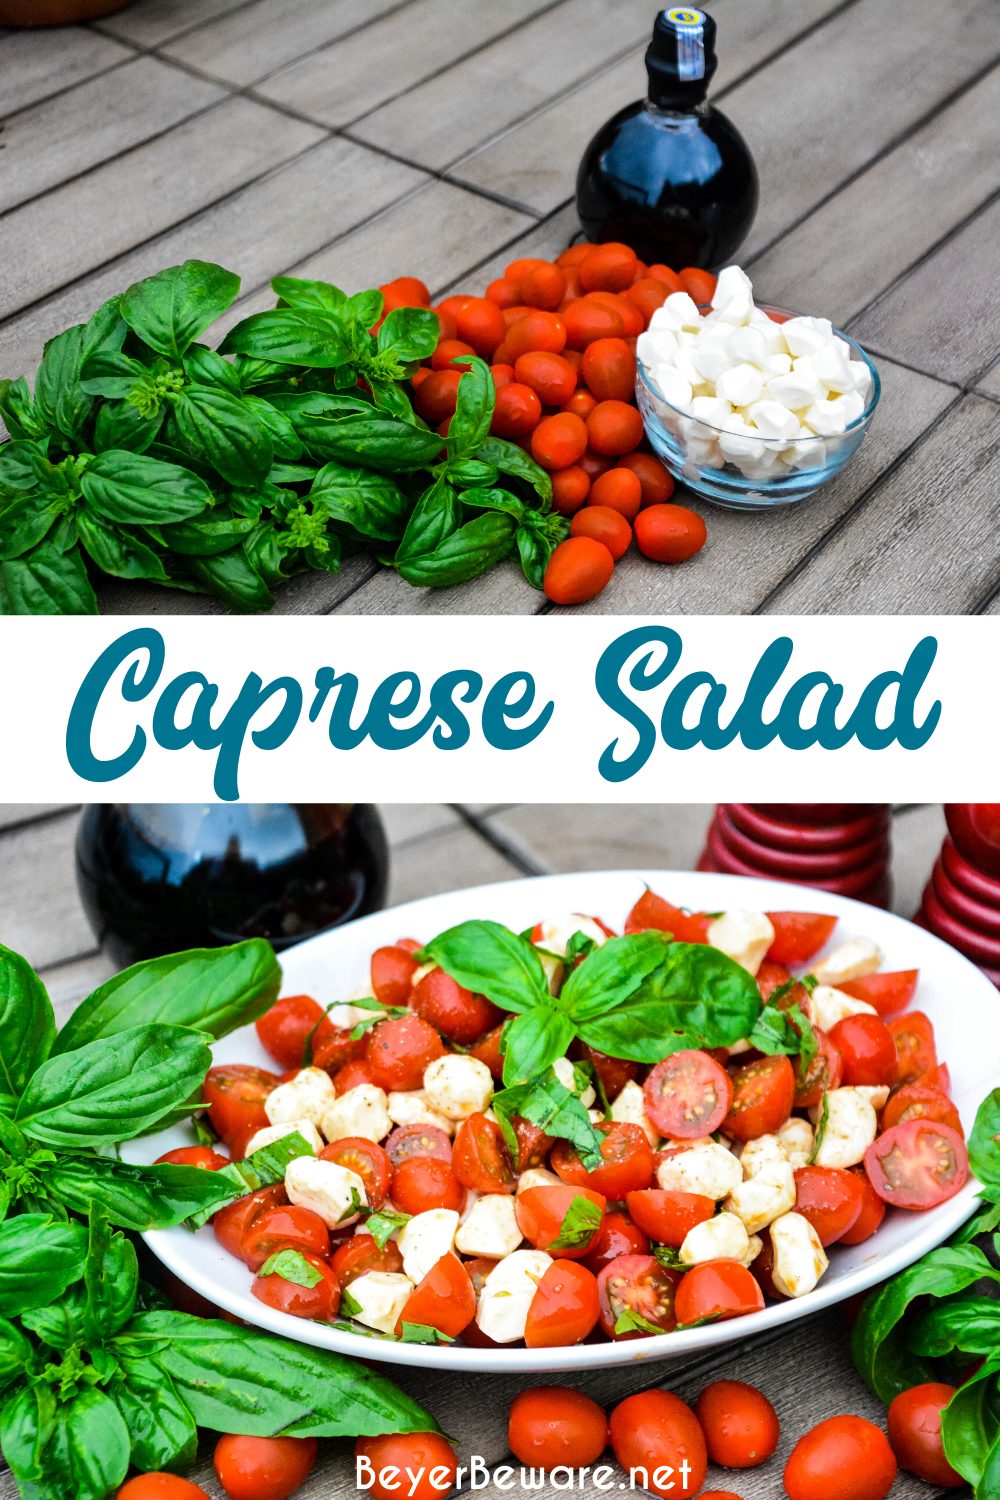 Caprese Salad is a simple fresh tomato salad recipe made with fresh tomatoes, basil, and mozzarella with balsamic vinegar and olive oil for a quick and easy side dish all summer long.